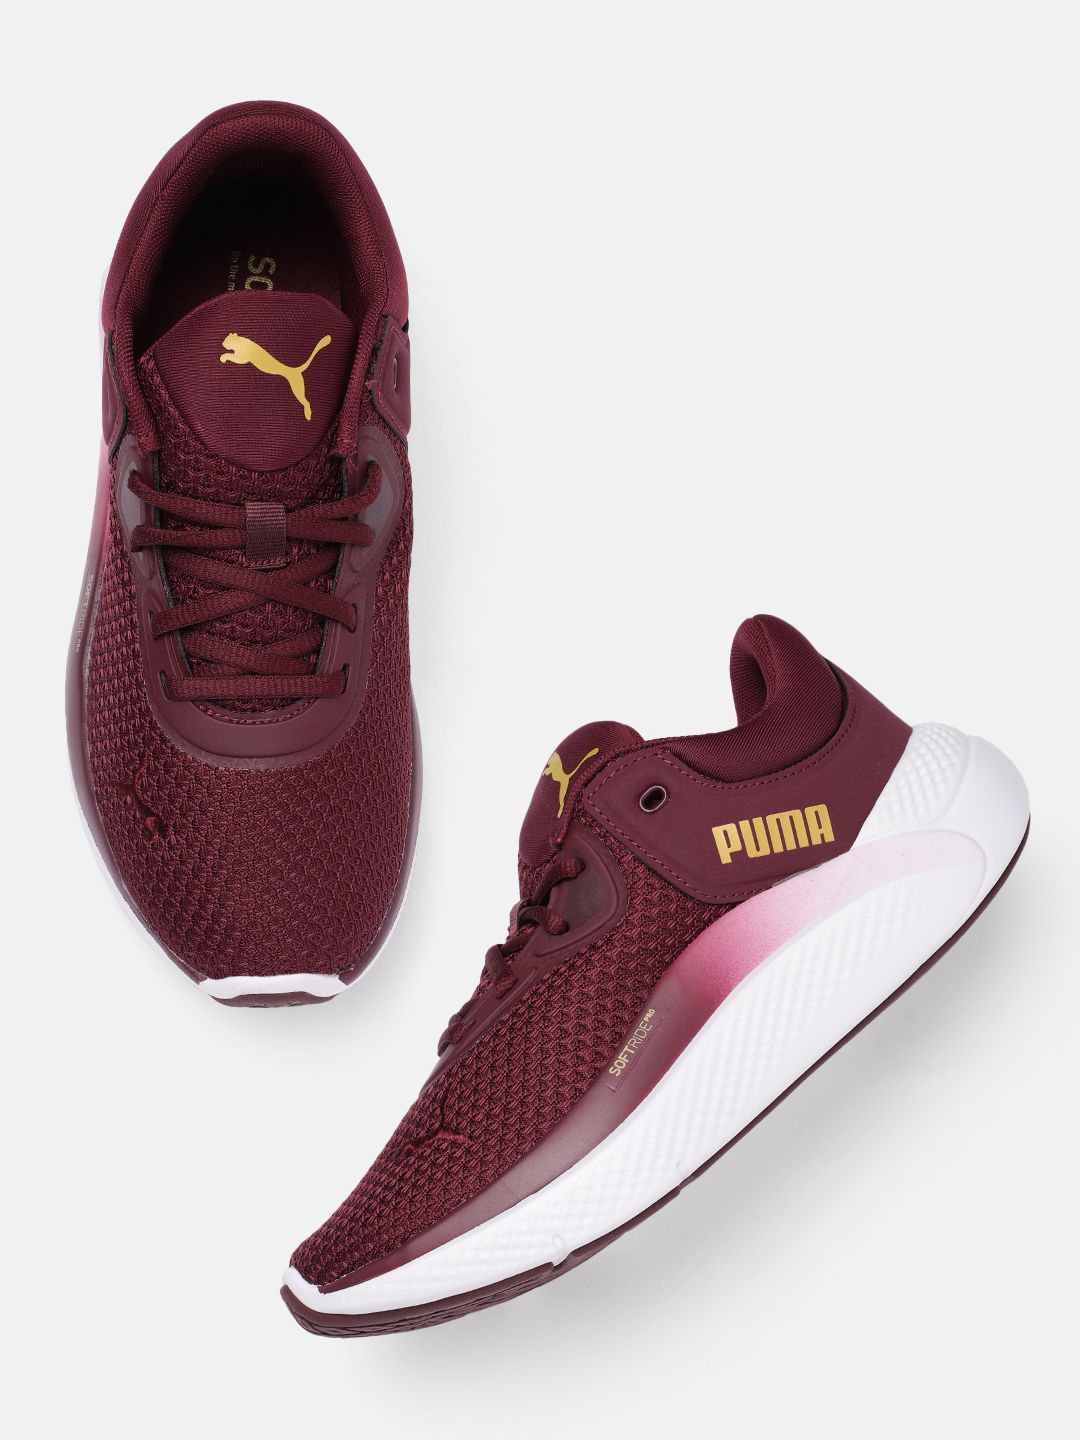 Puma Women Softride Pro Training Shoes Price in India